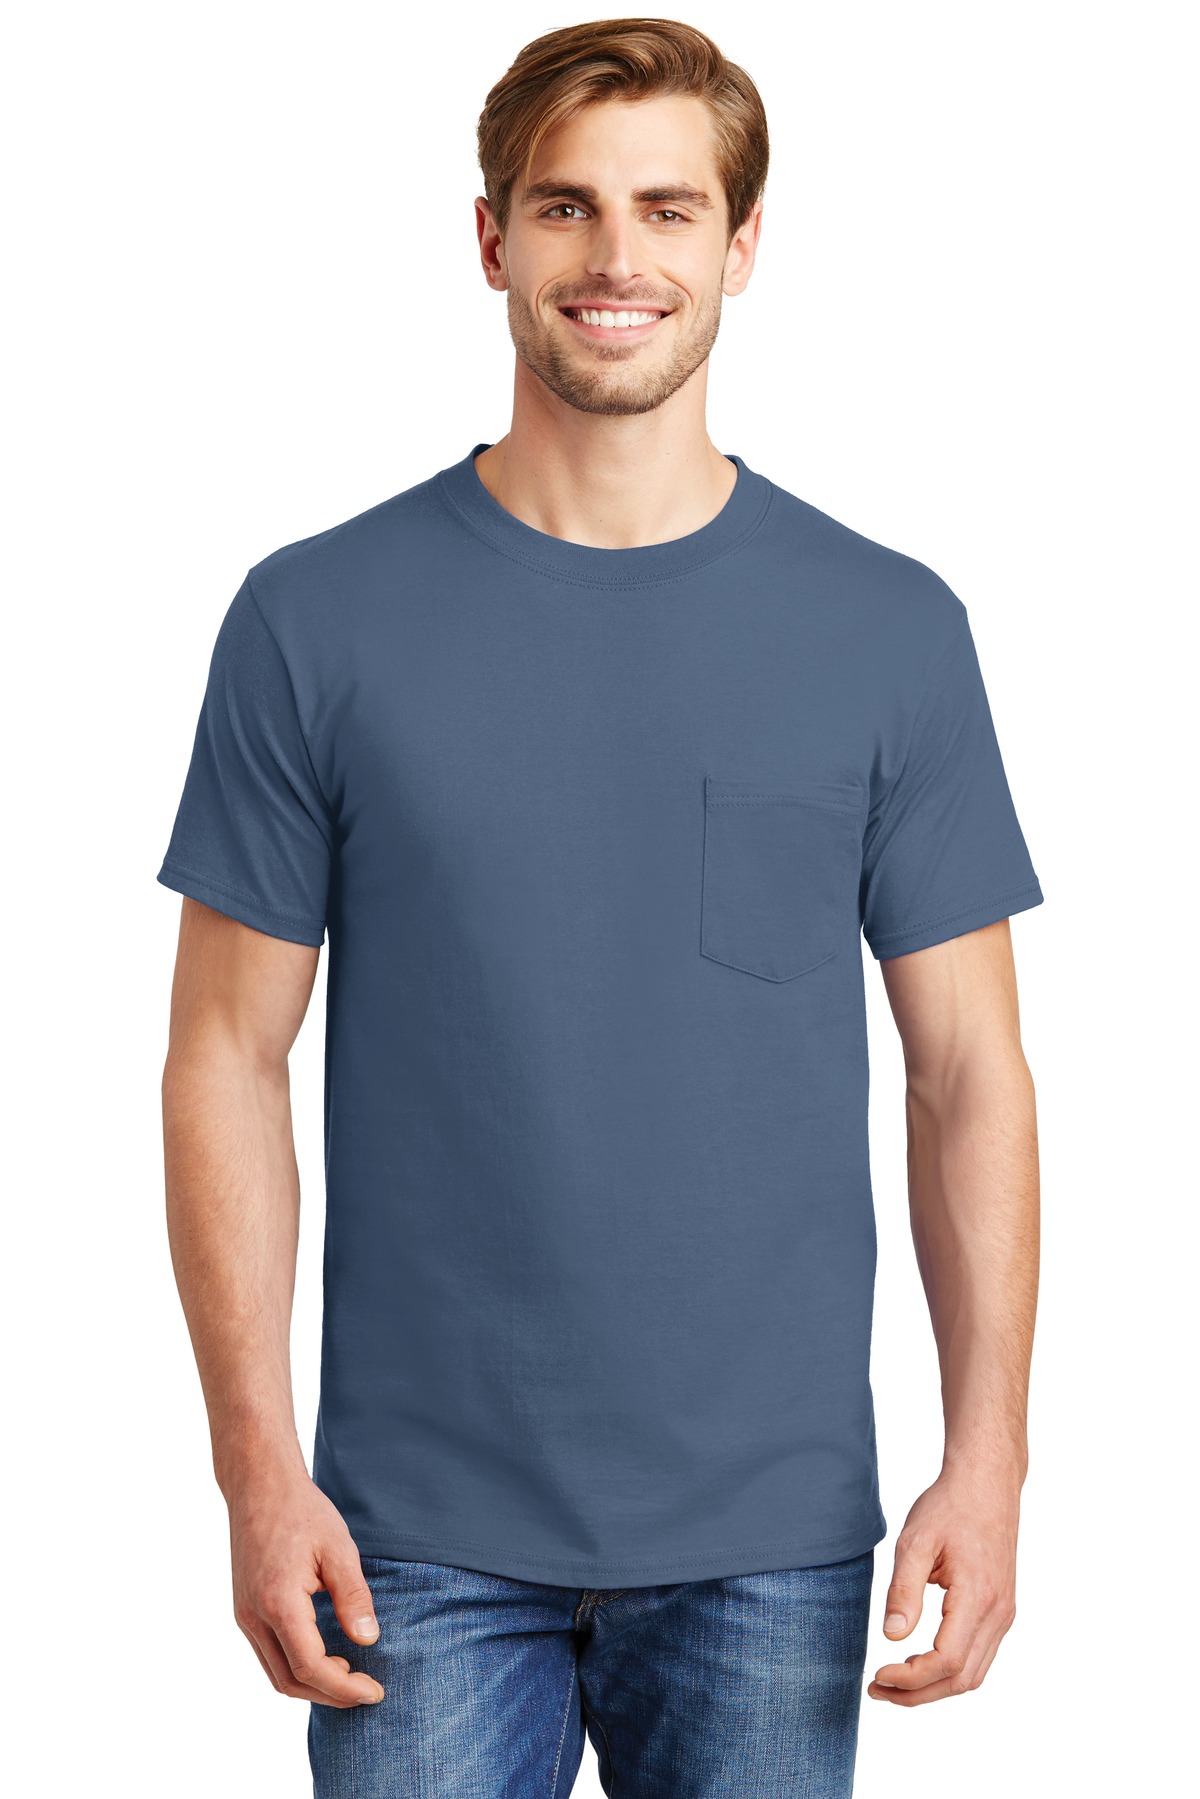 Hanes Beefy-T - 100% Cotton T-Shirt with Pocket - 5190